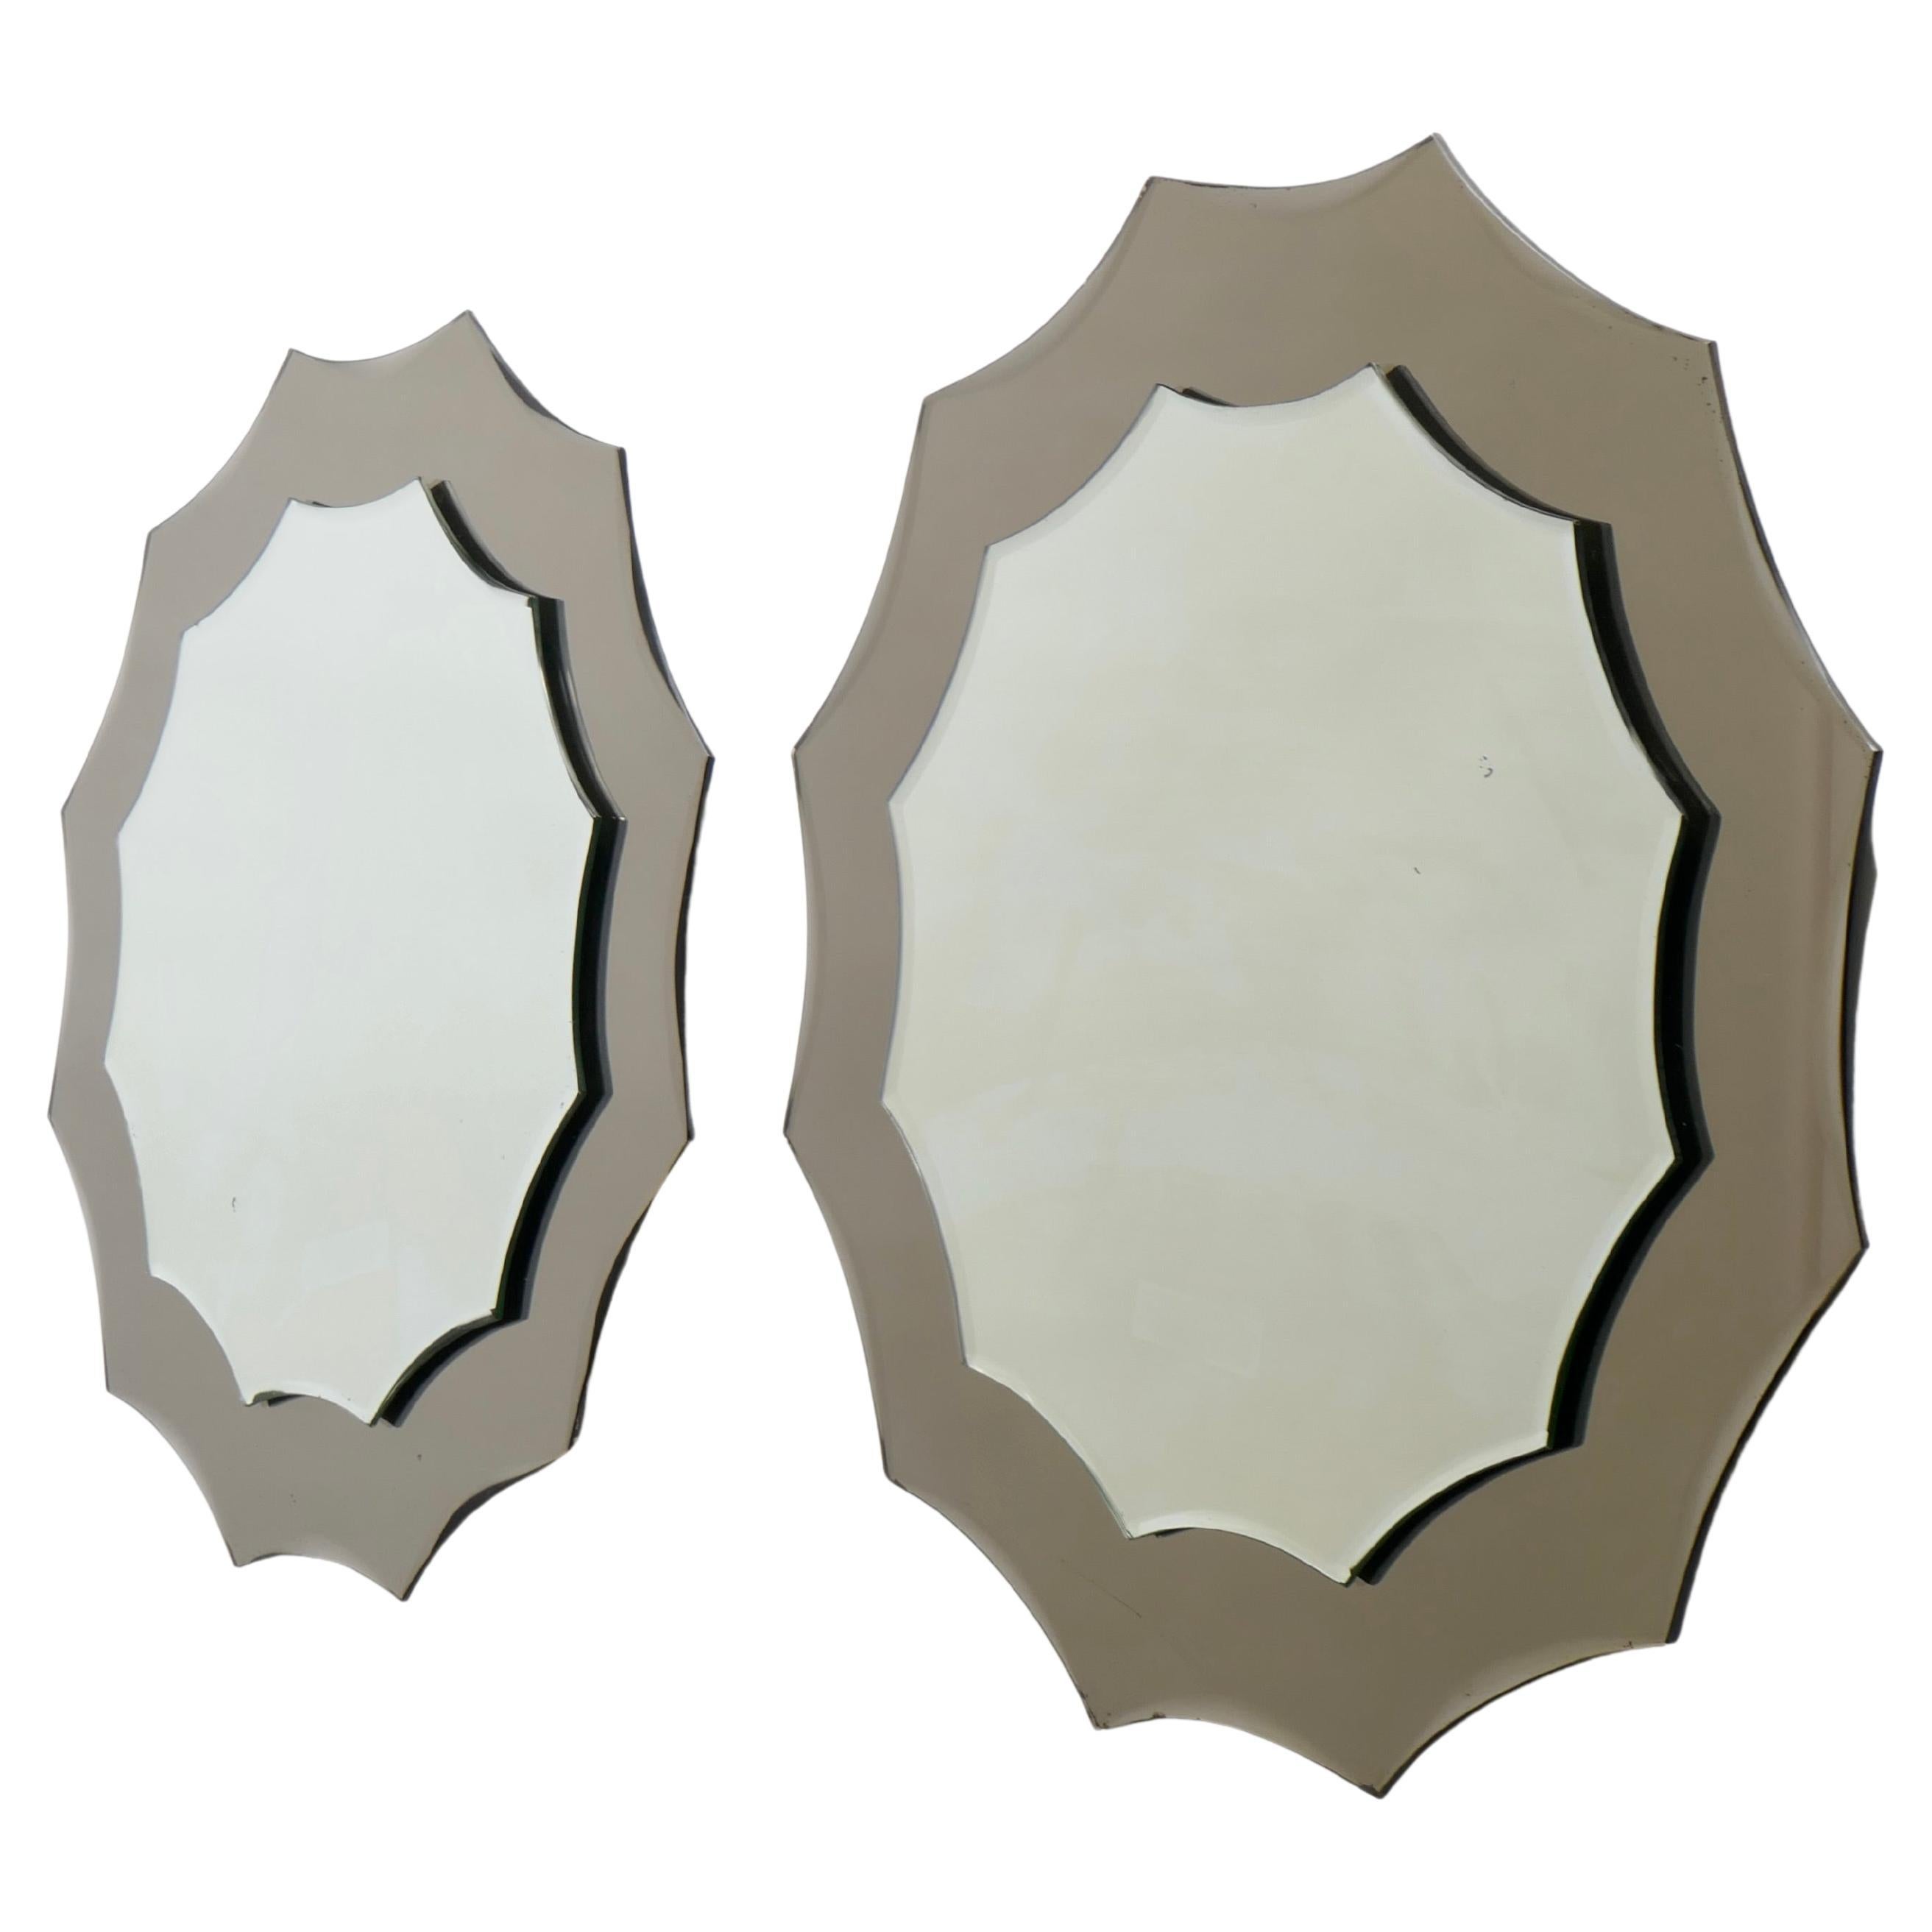 A pair of sun-shaped mirrors, each designed as a central scalloped glass set upon a larger bronze-tinted glass of identical design, produced in Italy in 1970s in the style of Fontana Arte. The mirrors are in excellent condition and add a playful